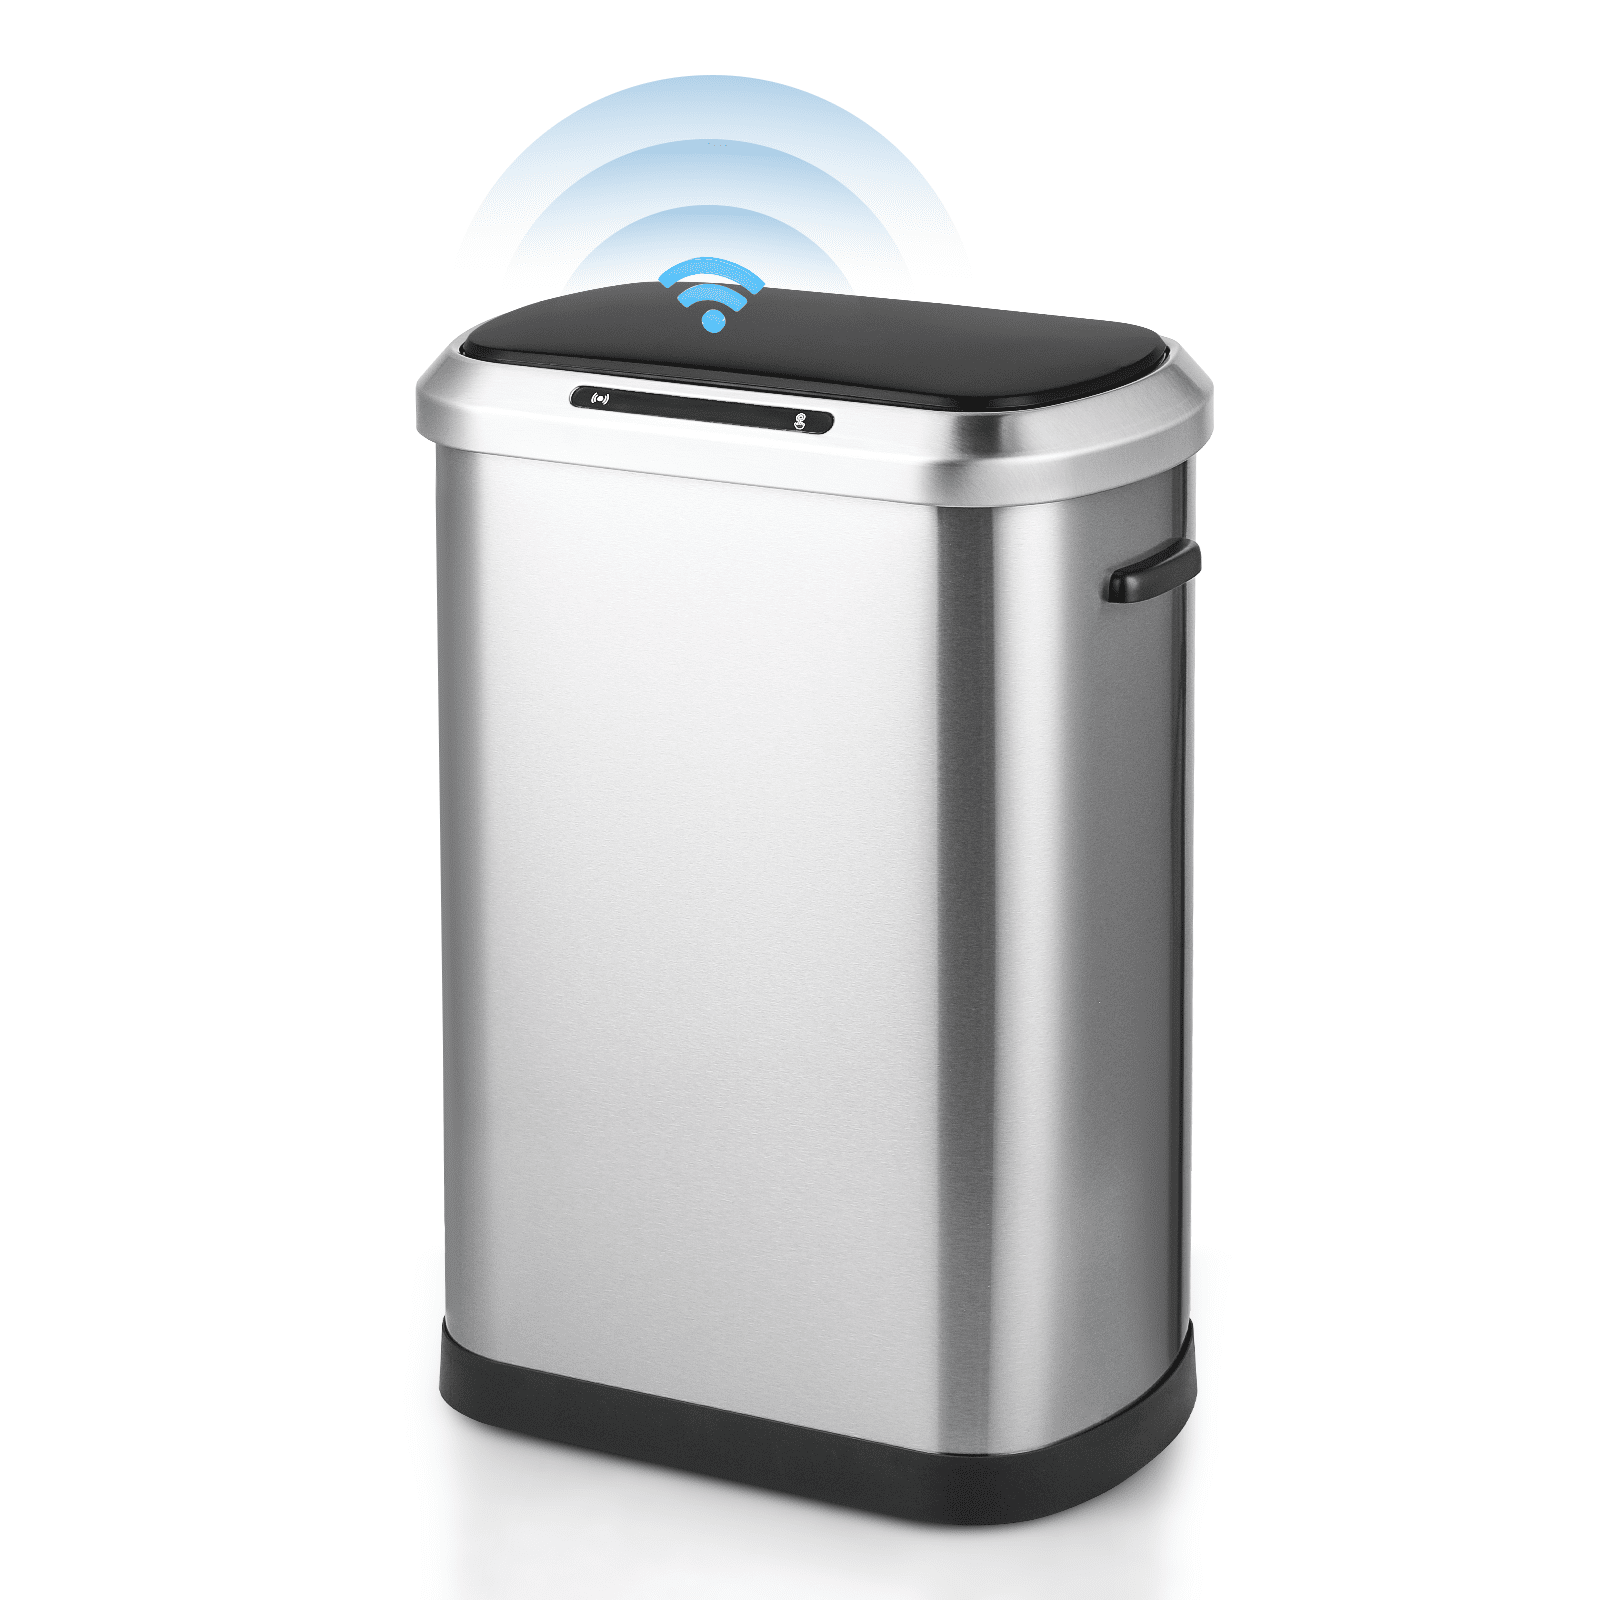  13 Gallon Automatic Trash Can with Motion-sensing Lid